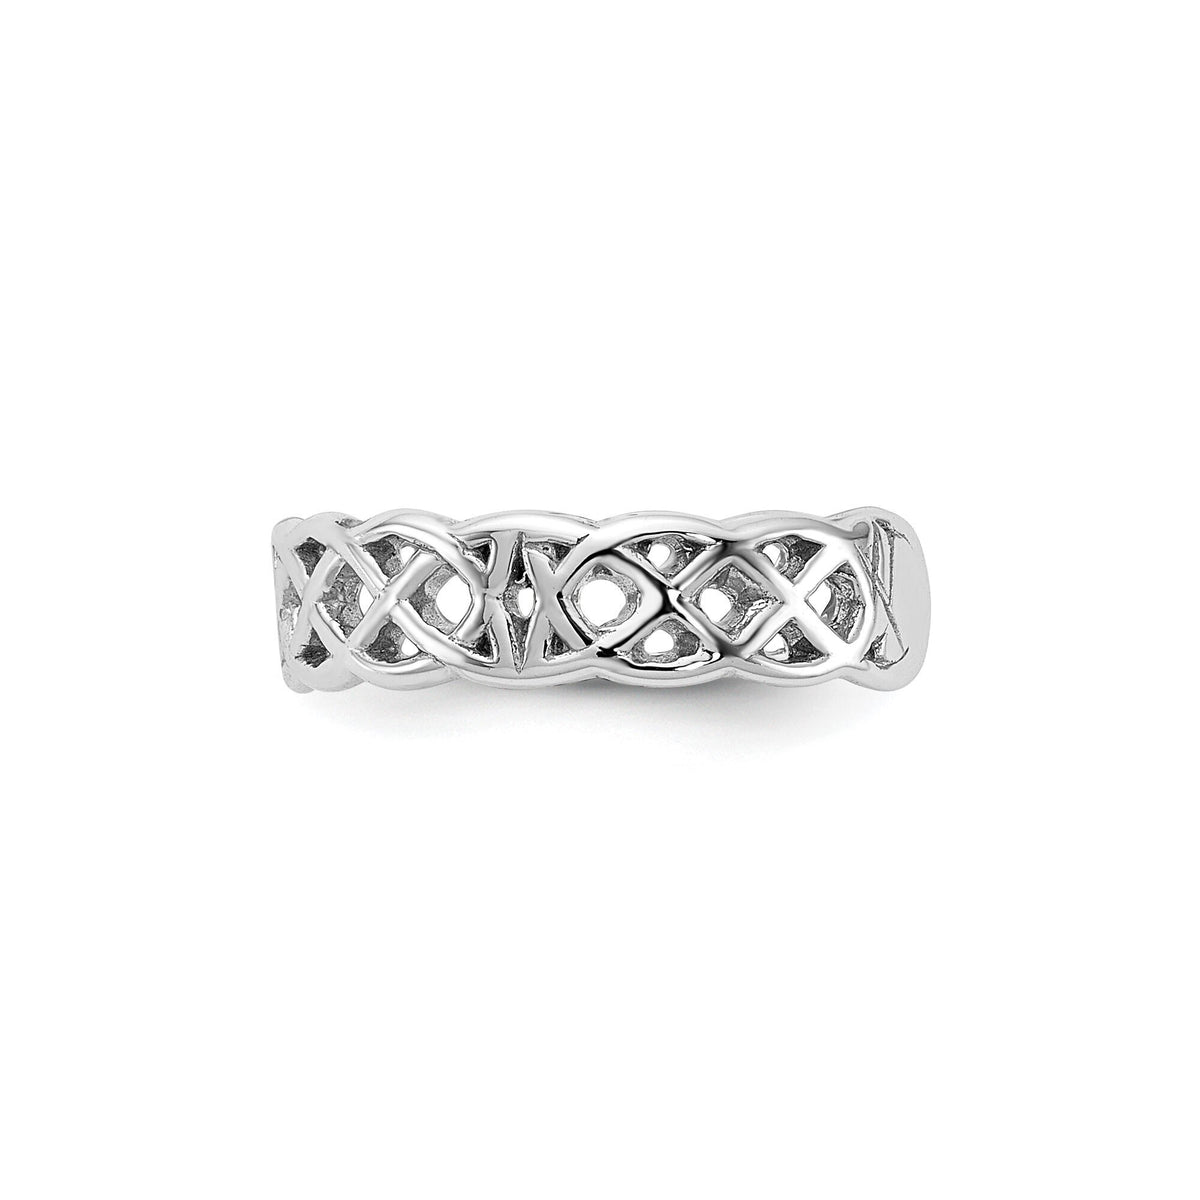 14k White Gold Fancy Design Toe Ring mm Band 4mm  - Gift Box Included - Made in USA - White Gold Toe Ring / Solid 14k White Gold Toe Ring